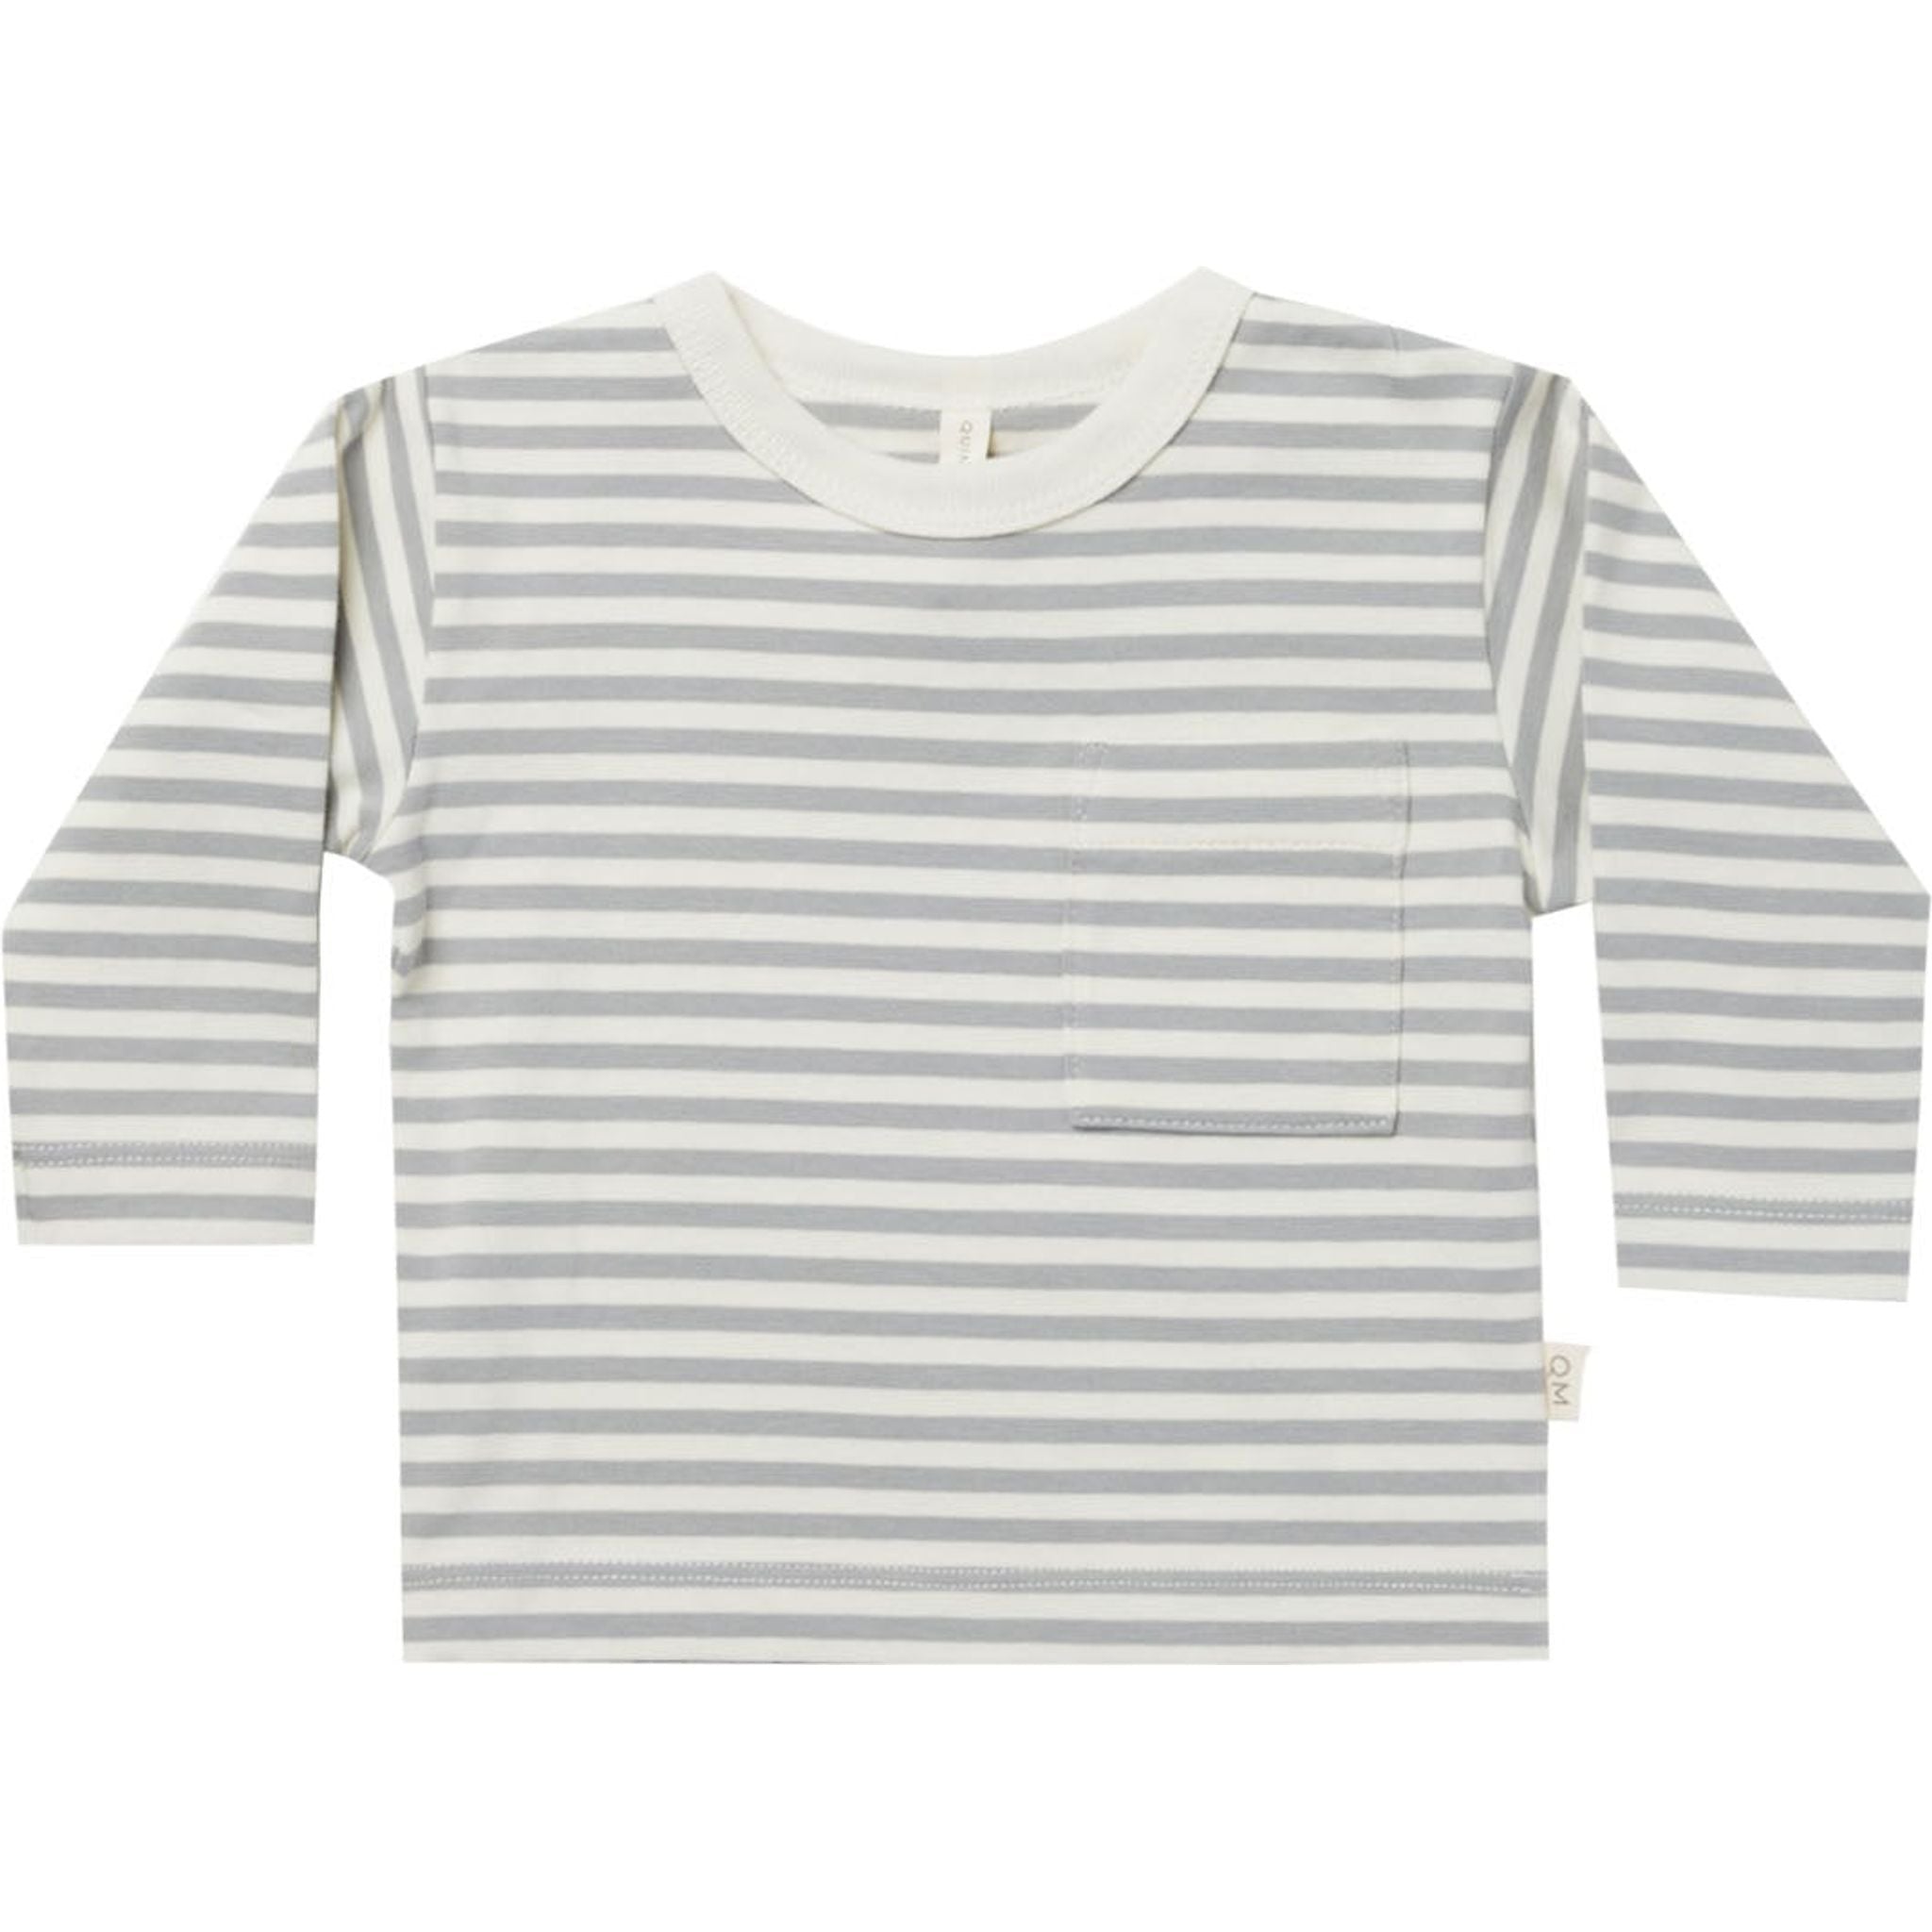 dusty blue and white striped long sleeve pocket tee